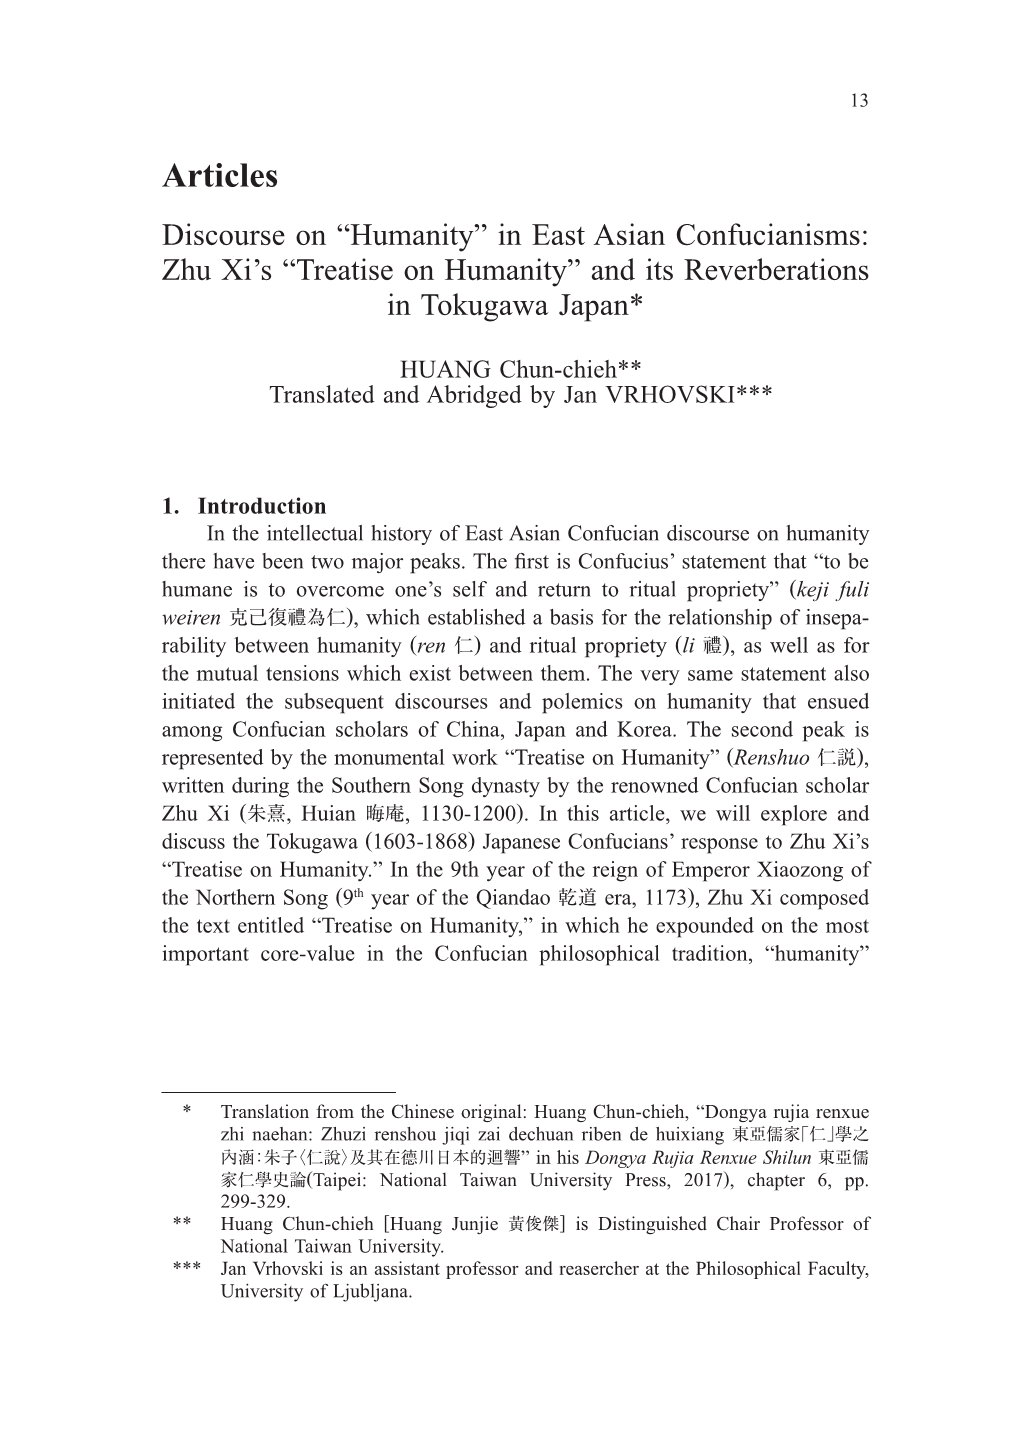 Articles Discourse on “Humanity” in East Asian Confucianisms: Zhu Xi’S “Treatise on Humanity” and Its Reverberations in Tokugawa Japan*